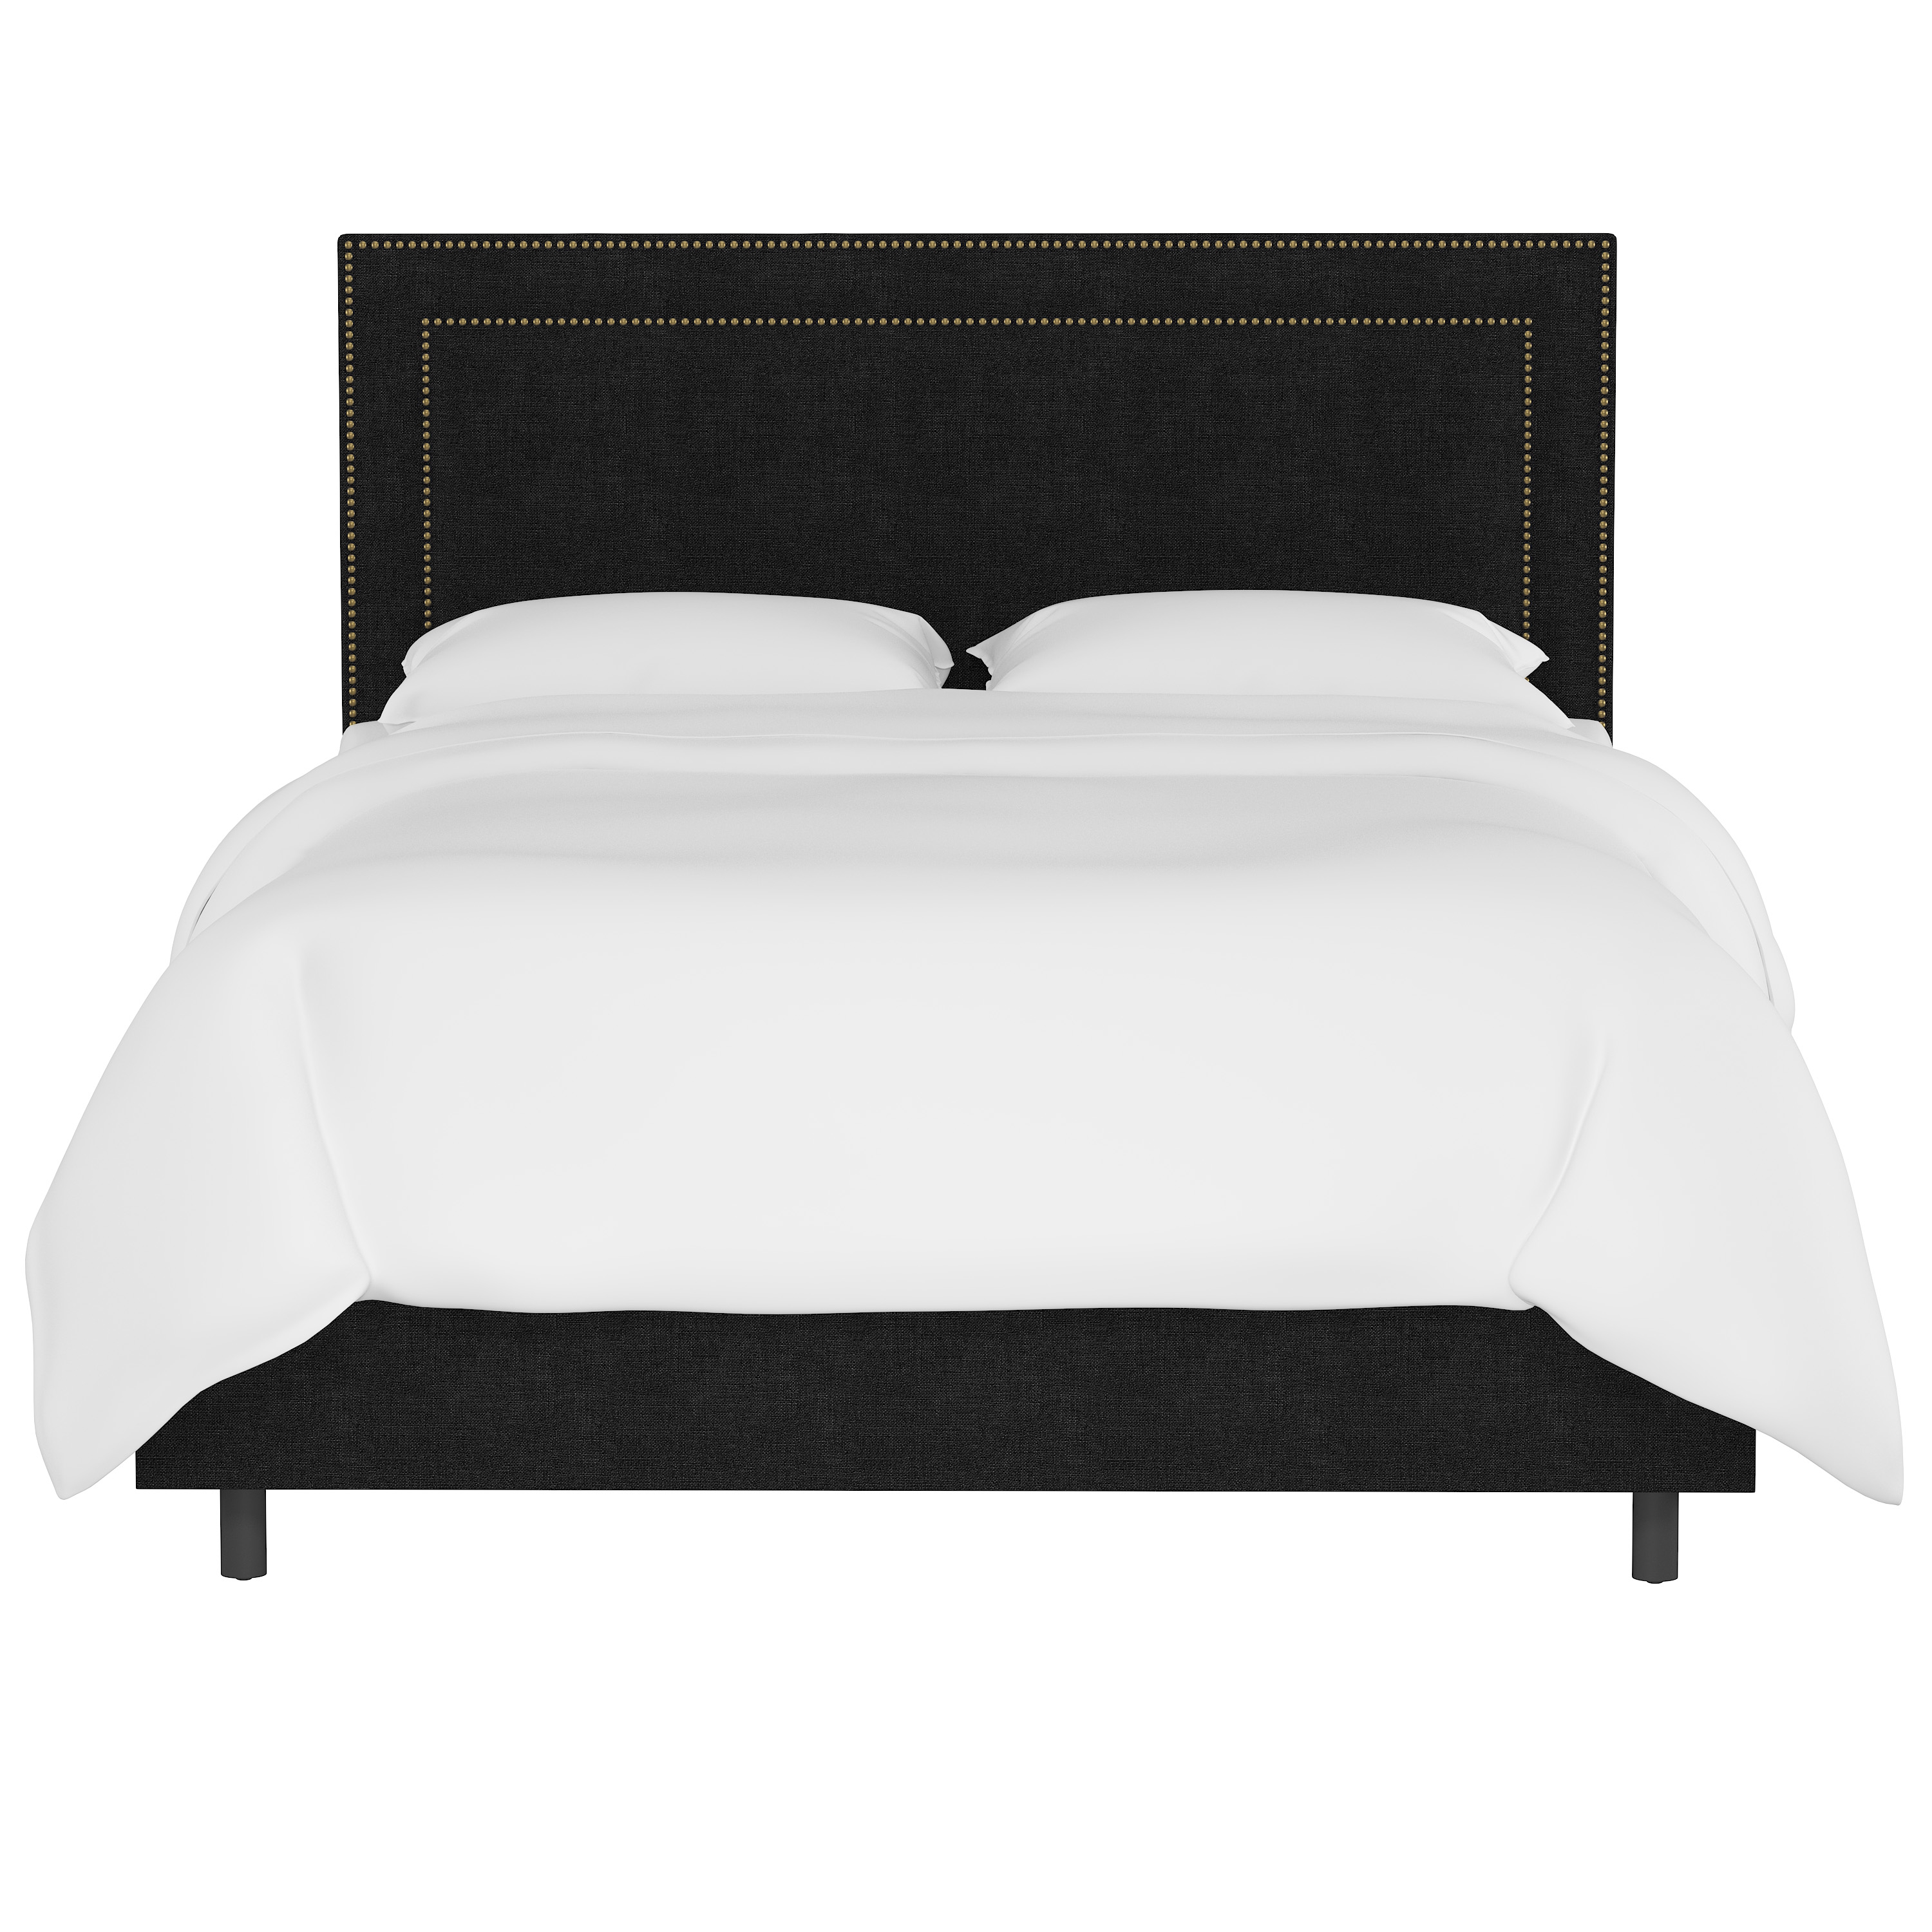 Williams Bed, Queen, Caviar, Brass Nailheads - Image 1